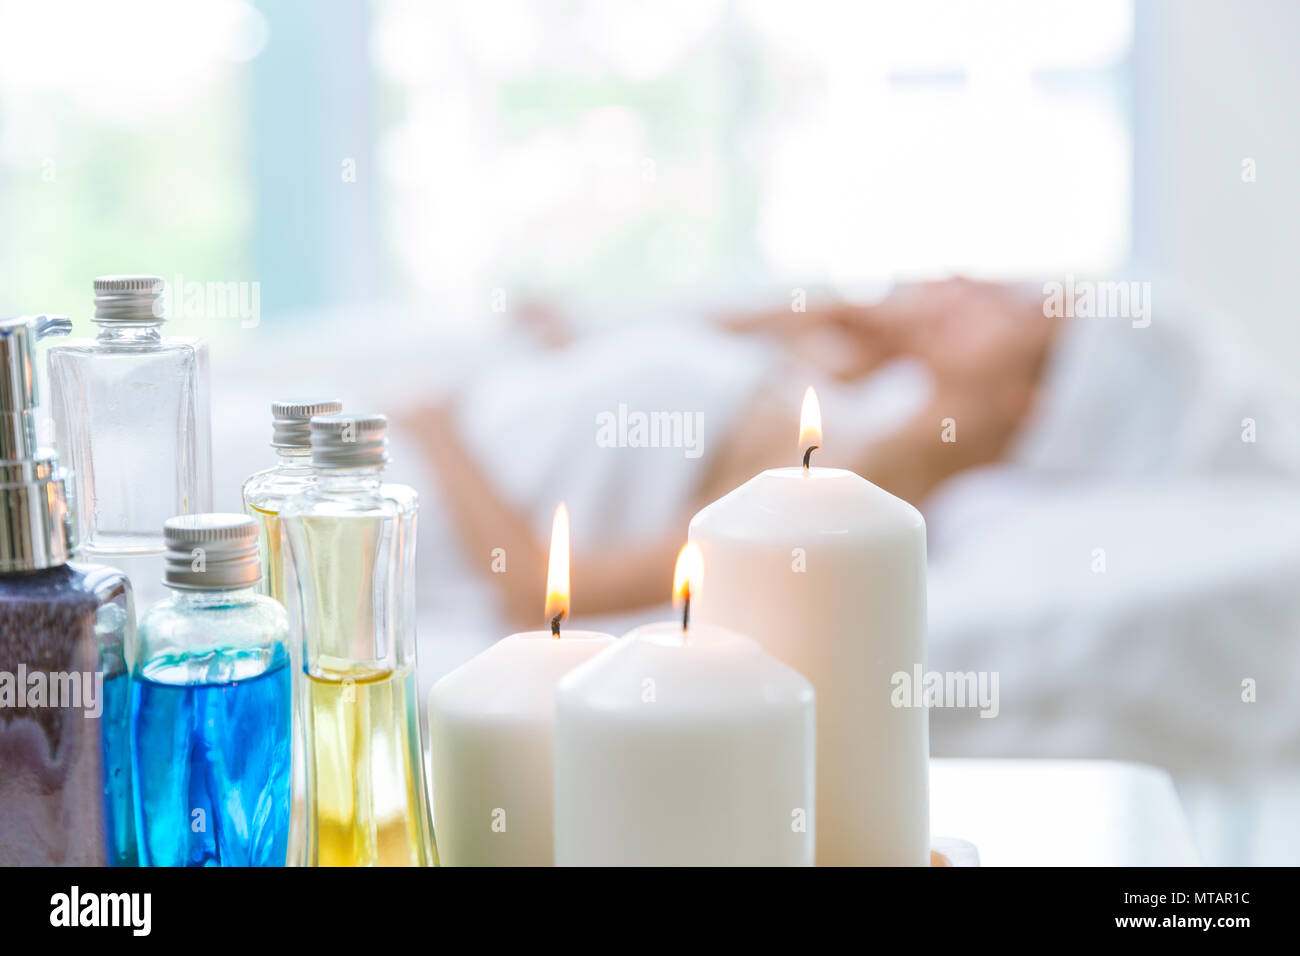 Beauty skin care Spa and Massage relax after work with blur two woman background. Stock Photo